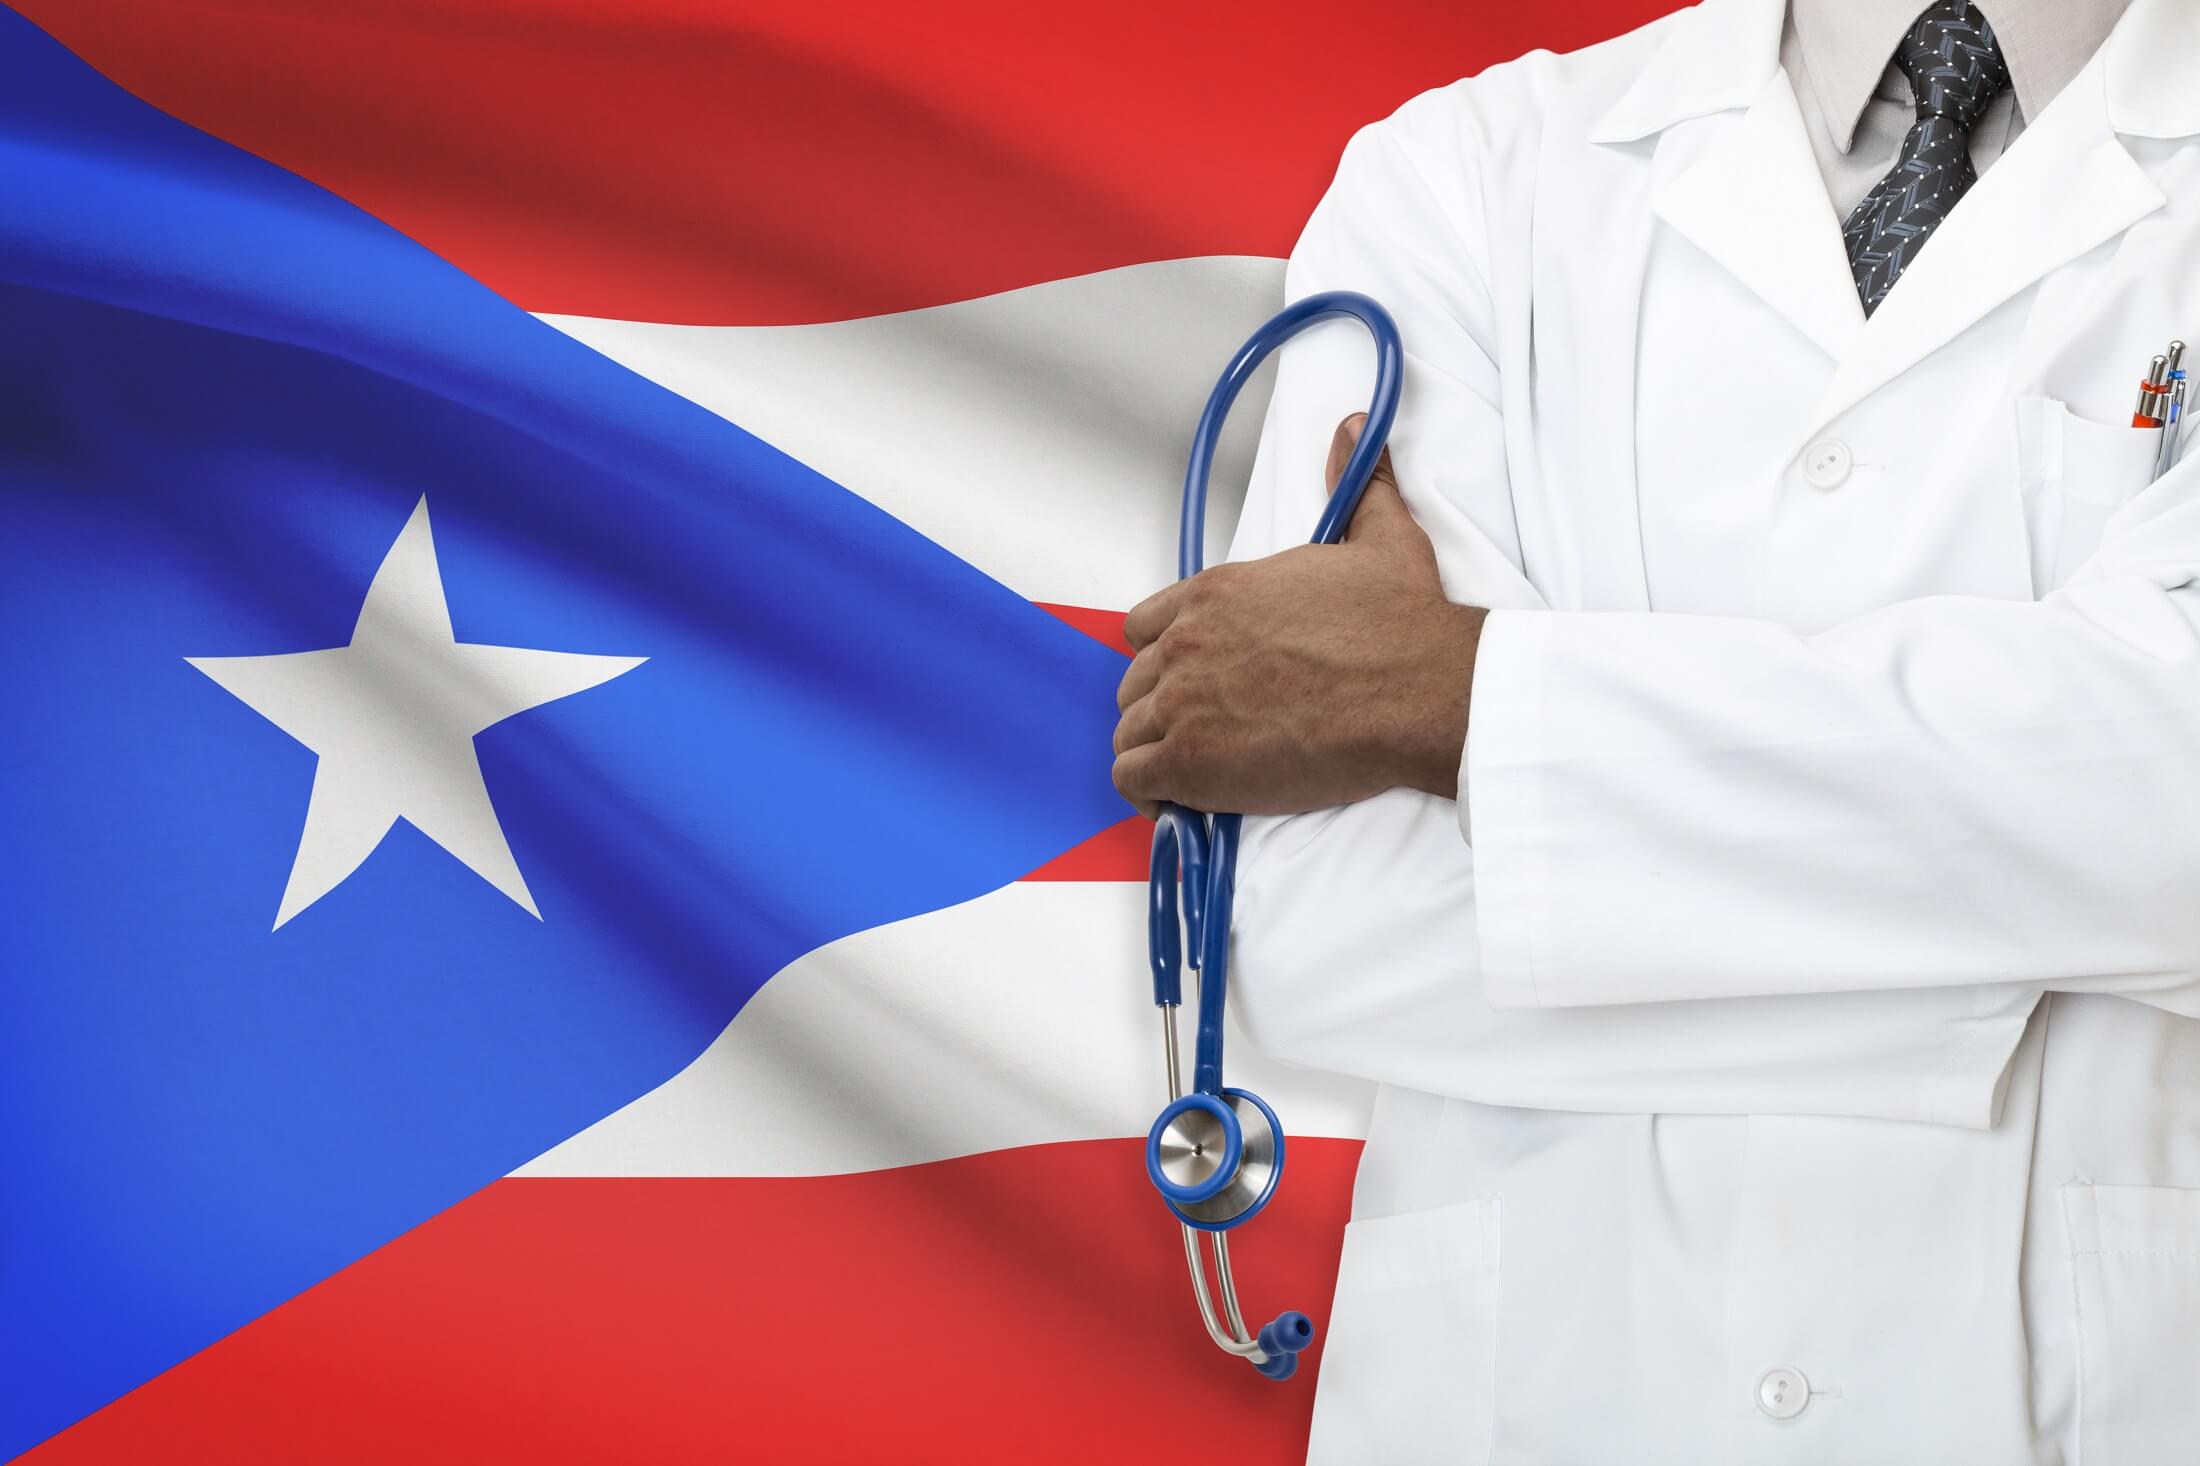 Concept of national healthcare system - Puerto Rico